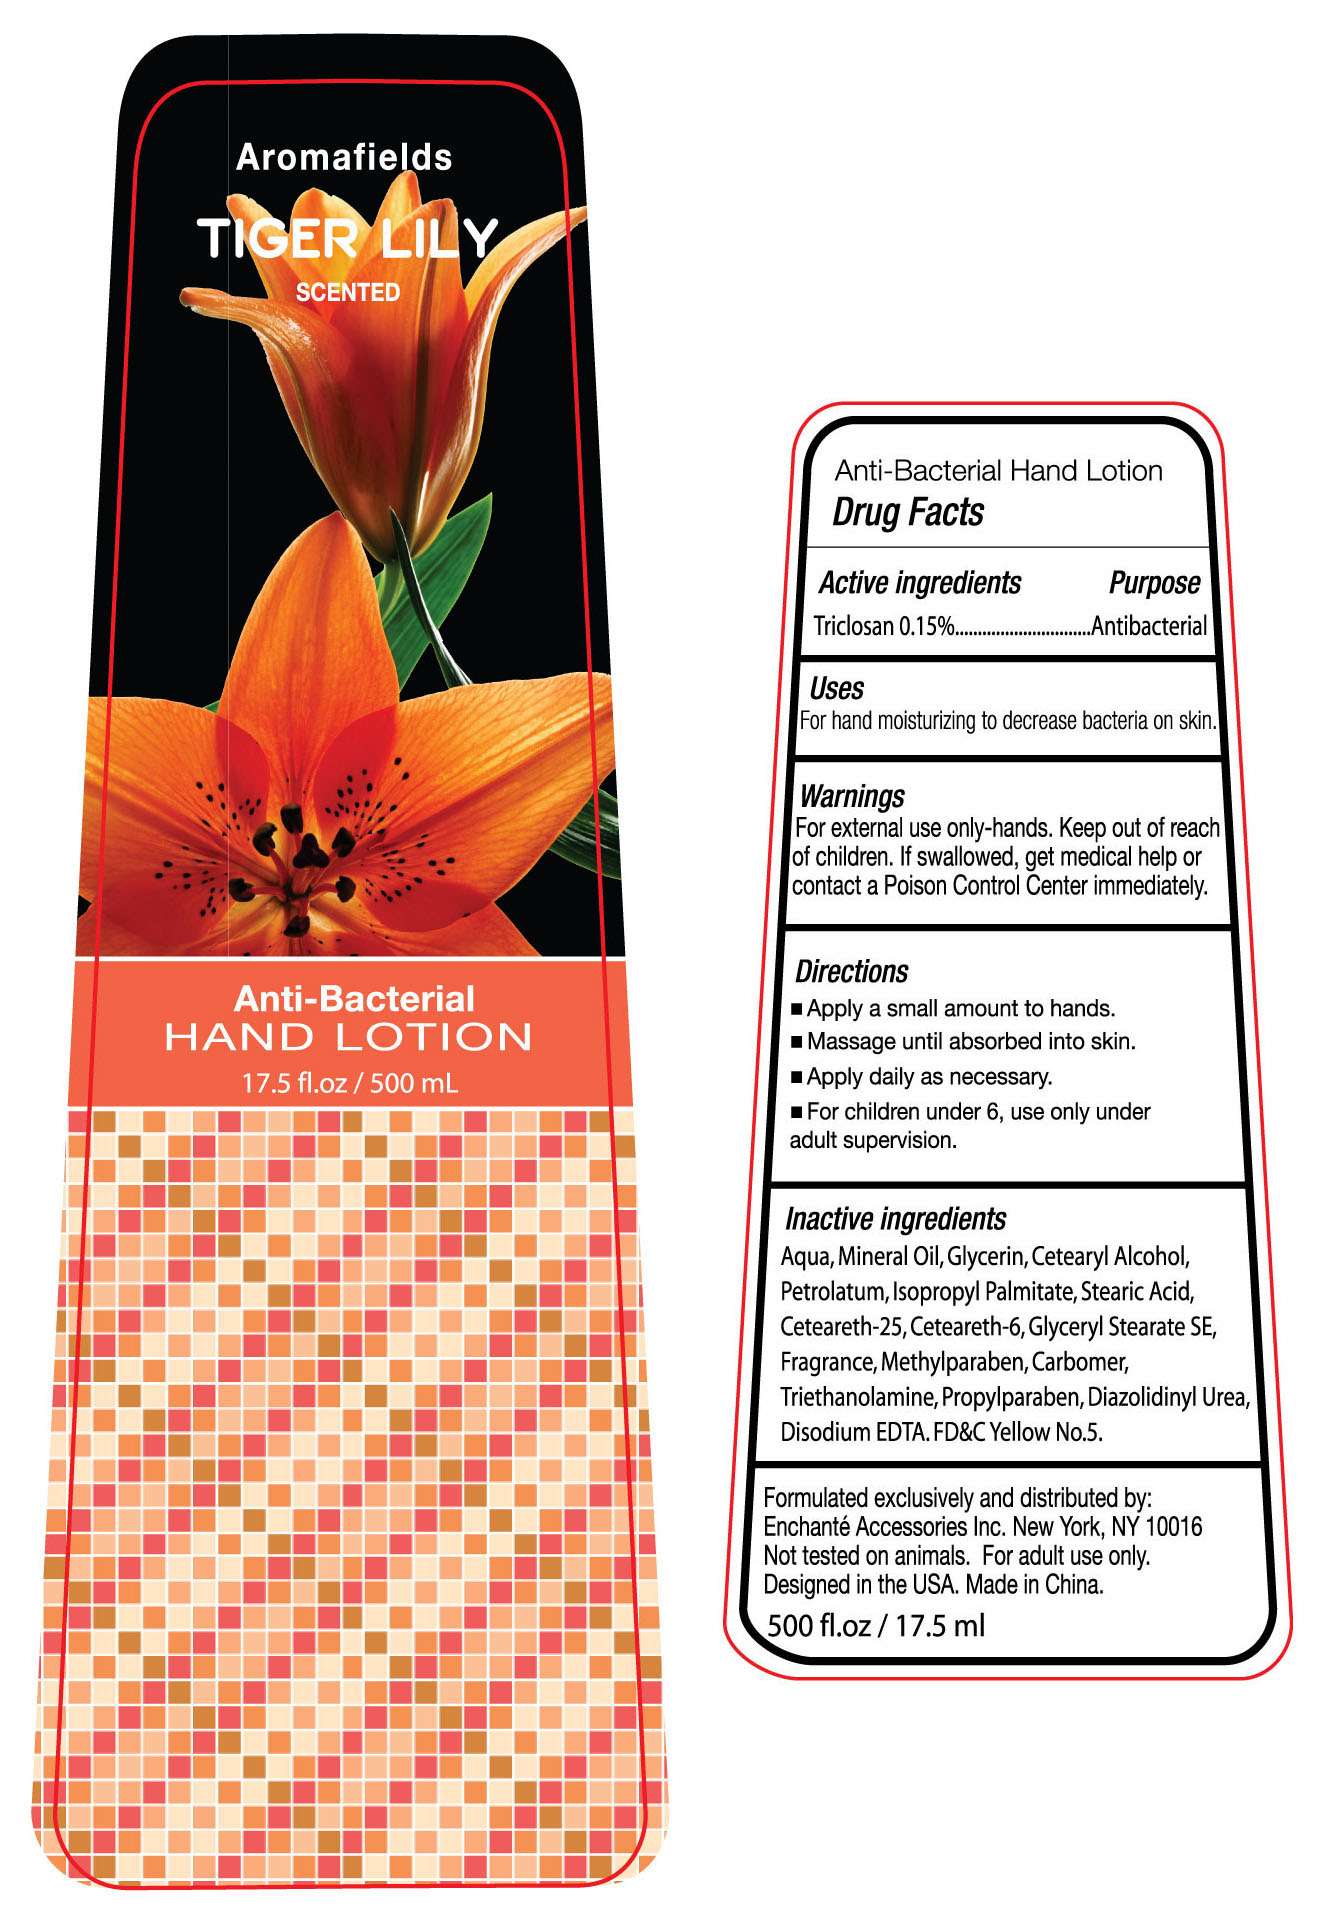 Aromafields Tiger Lily Scented Anti-Bacterial Hand